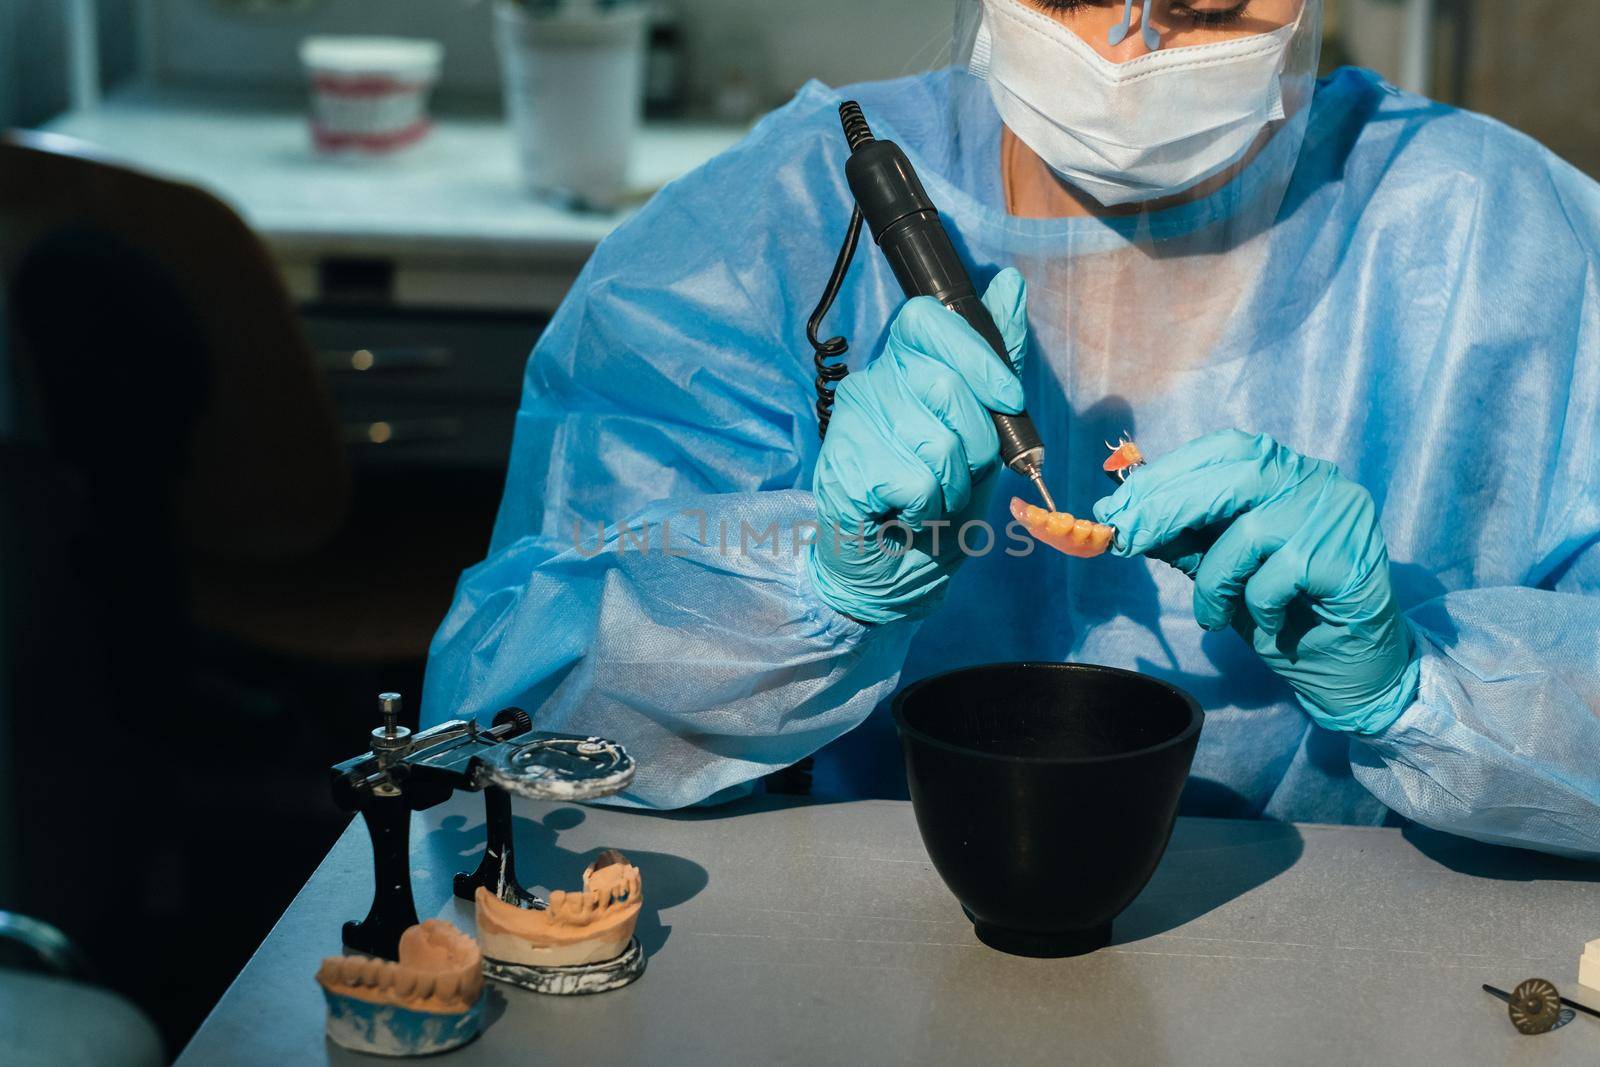 A masked and gloved dental technician works on a prosthetic tooth in his lab.